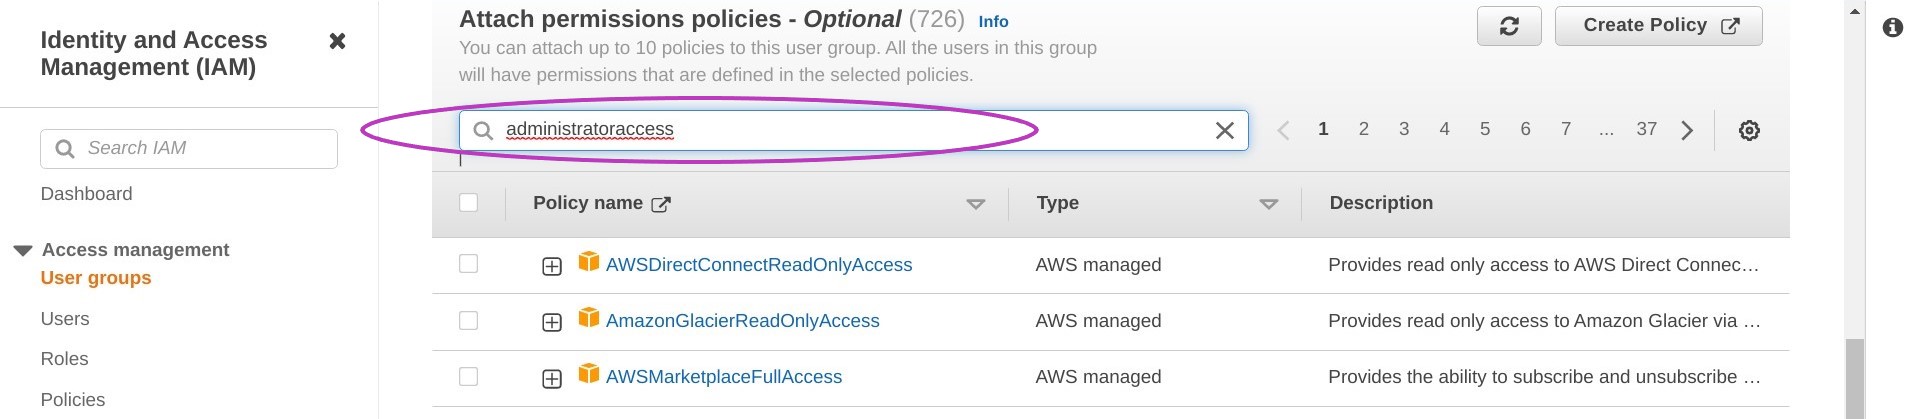 Screen shot of AWS Console "Attach Permissions Policies" section in a browser with the policies search box circled